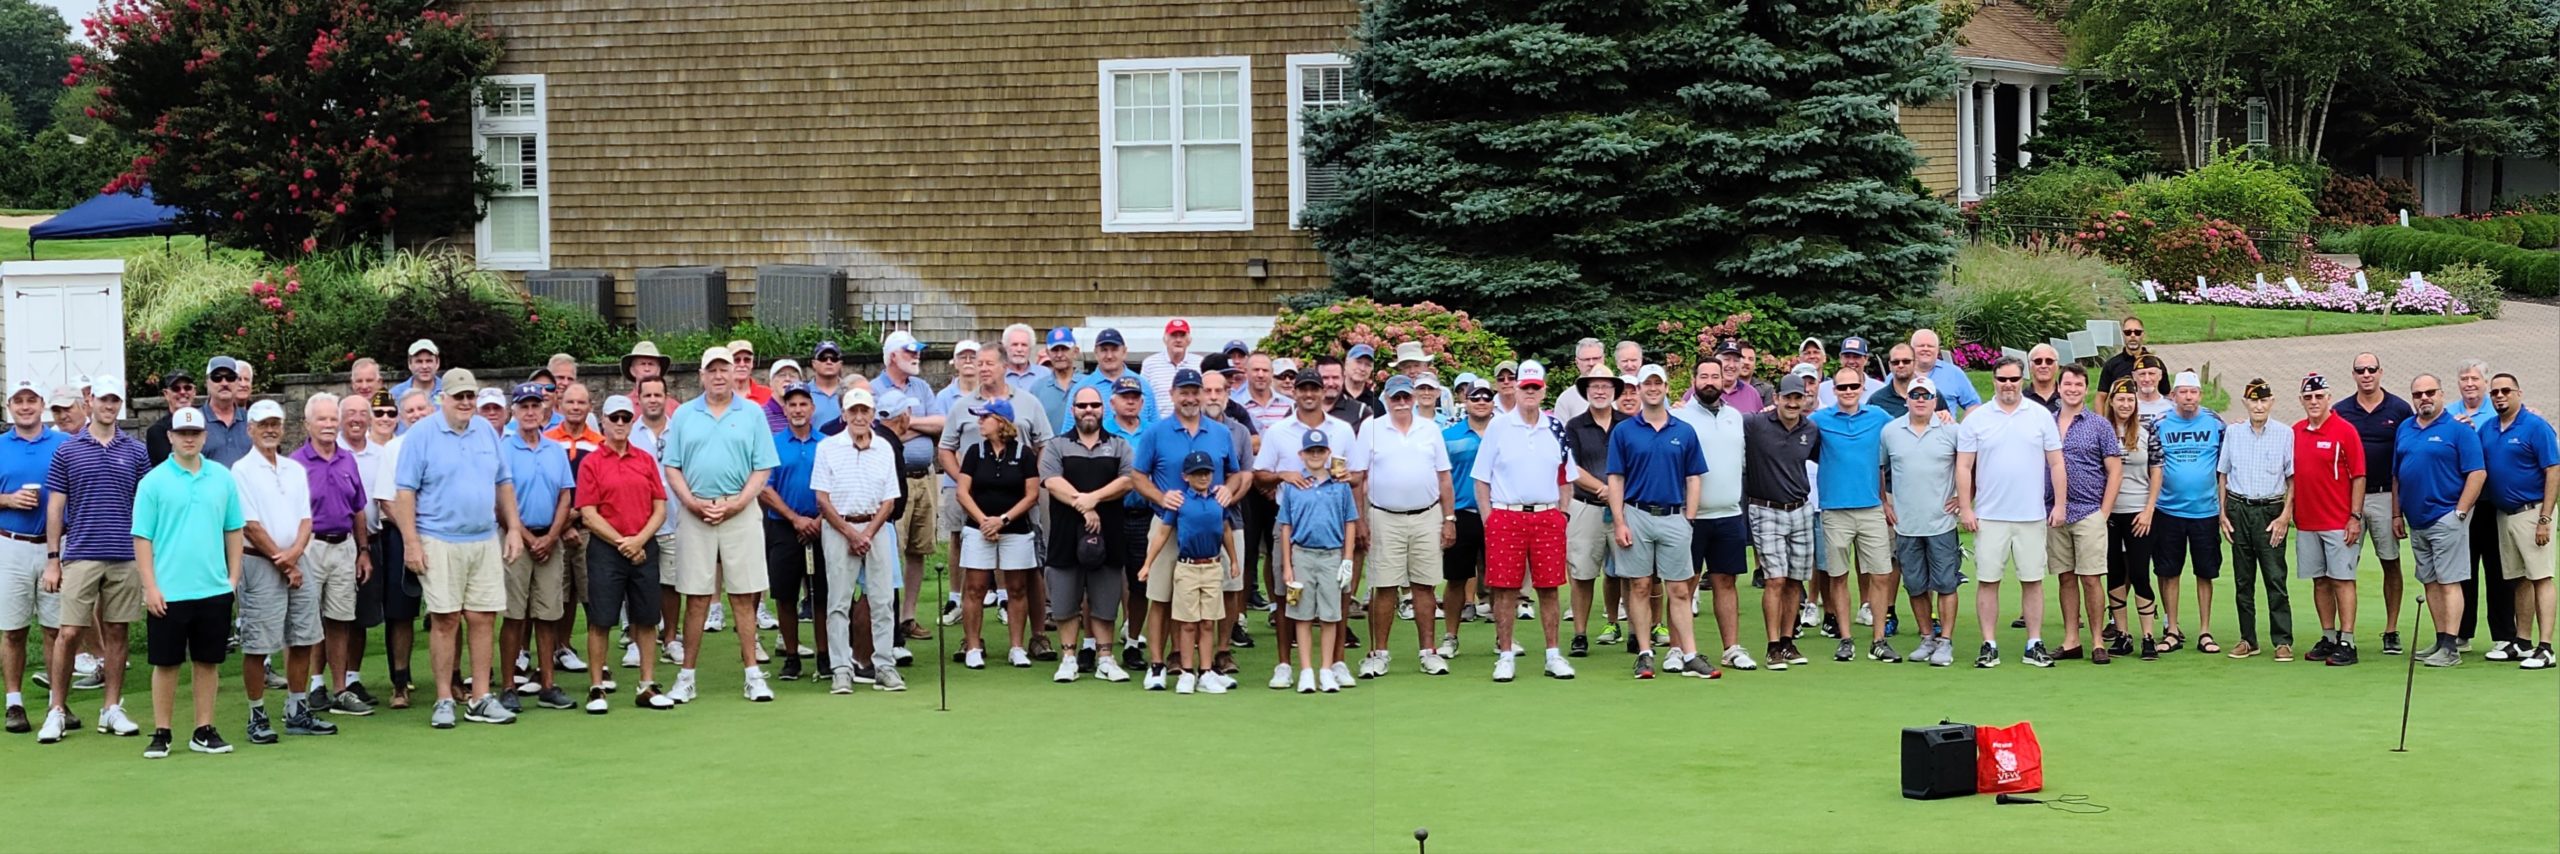 Golfers gathered at The Vineyards Golf Club in Riverhead in late August in support of the Veterans of Forign Wars Post 5350 of Westhampton, which had its annual golf outing.